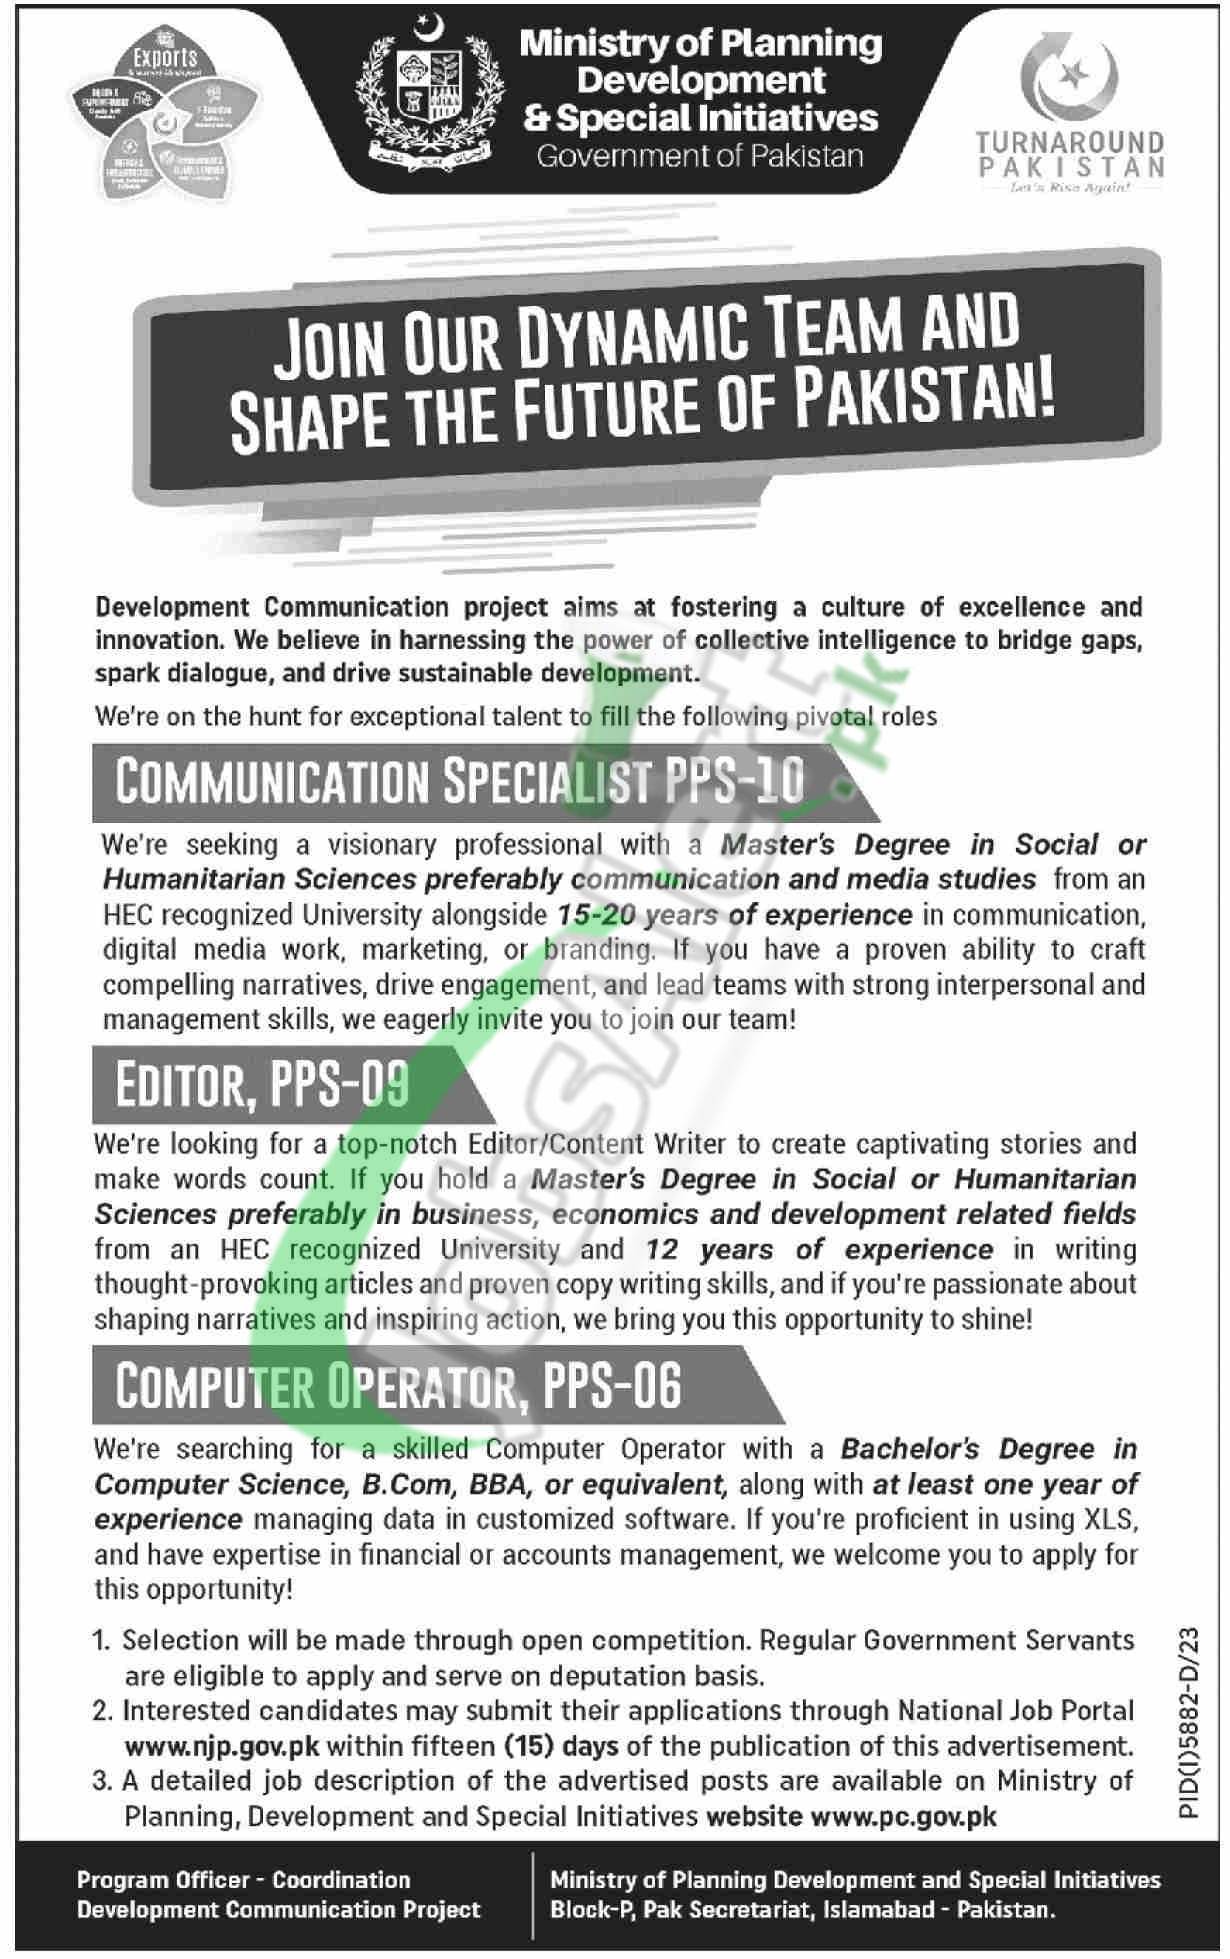 Ministry of Planning Development & Special Initiatives Jobs